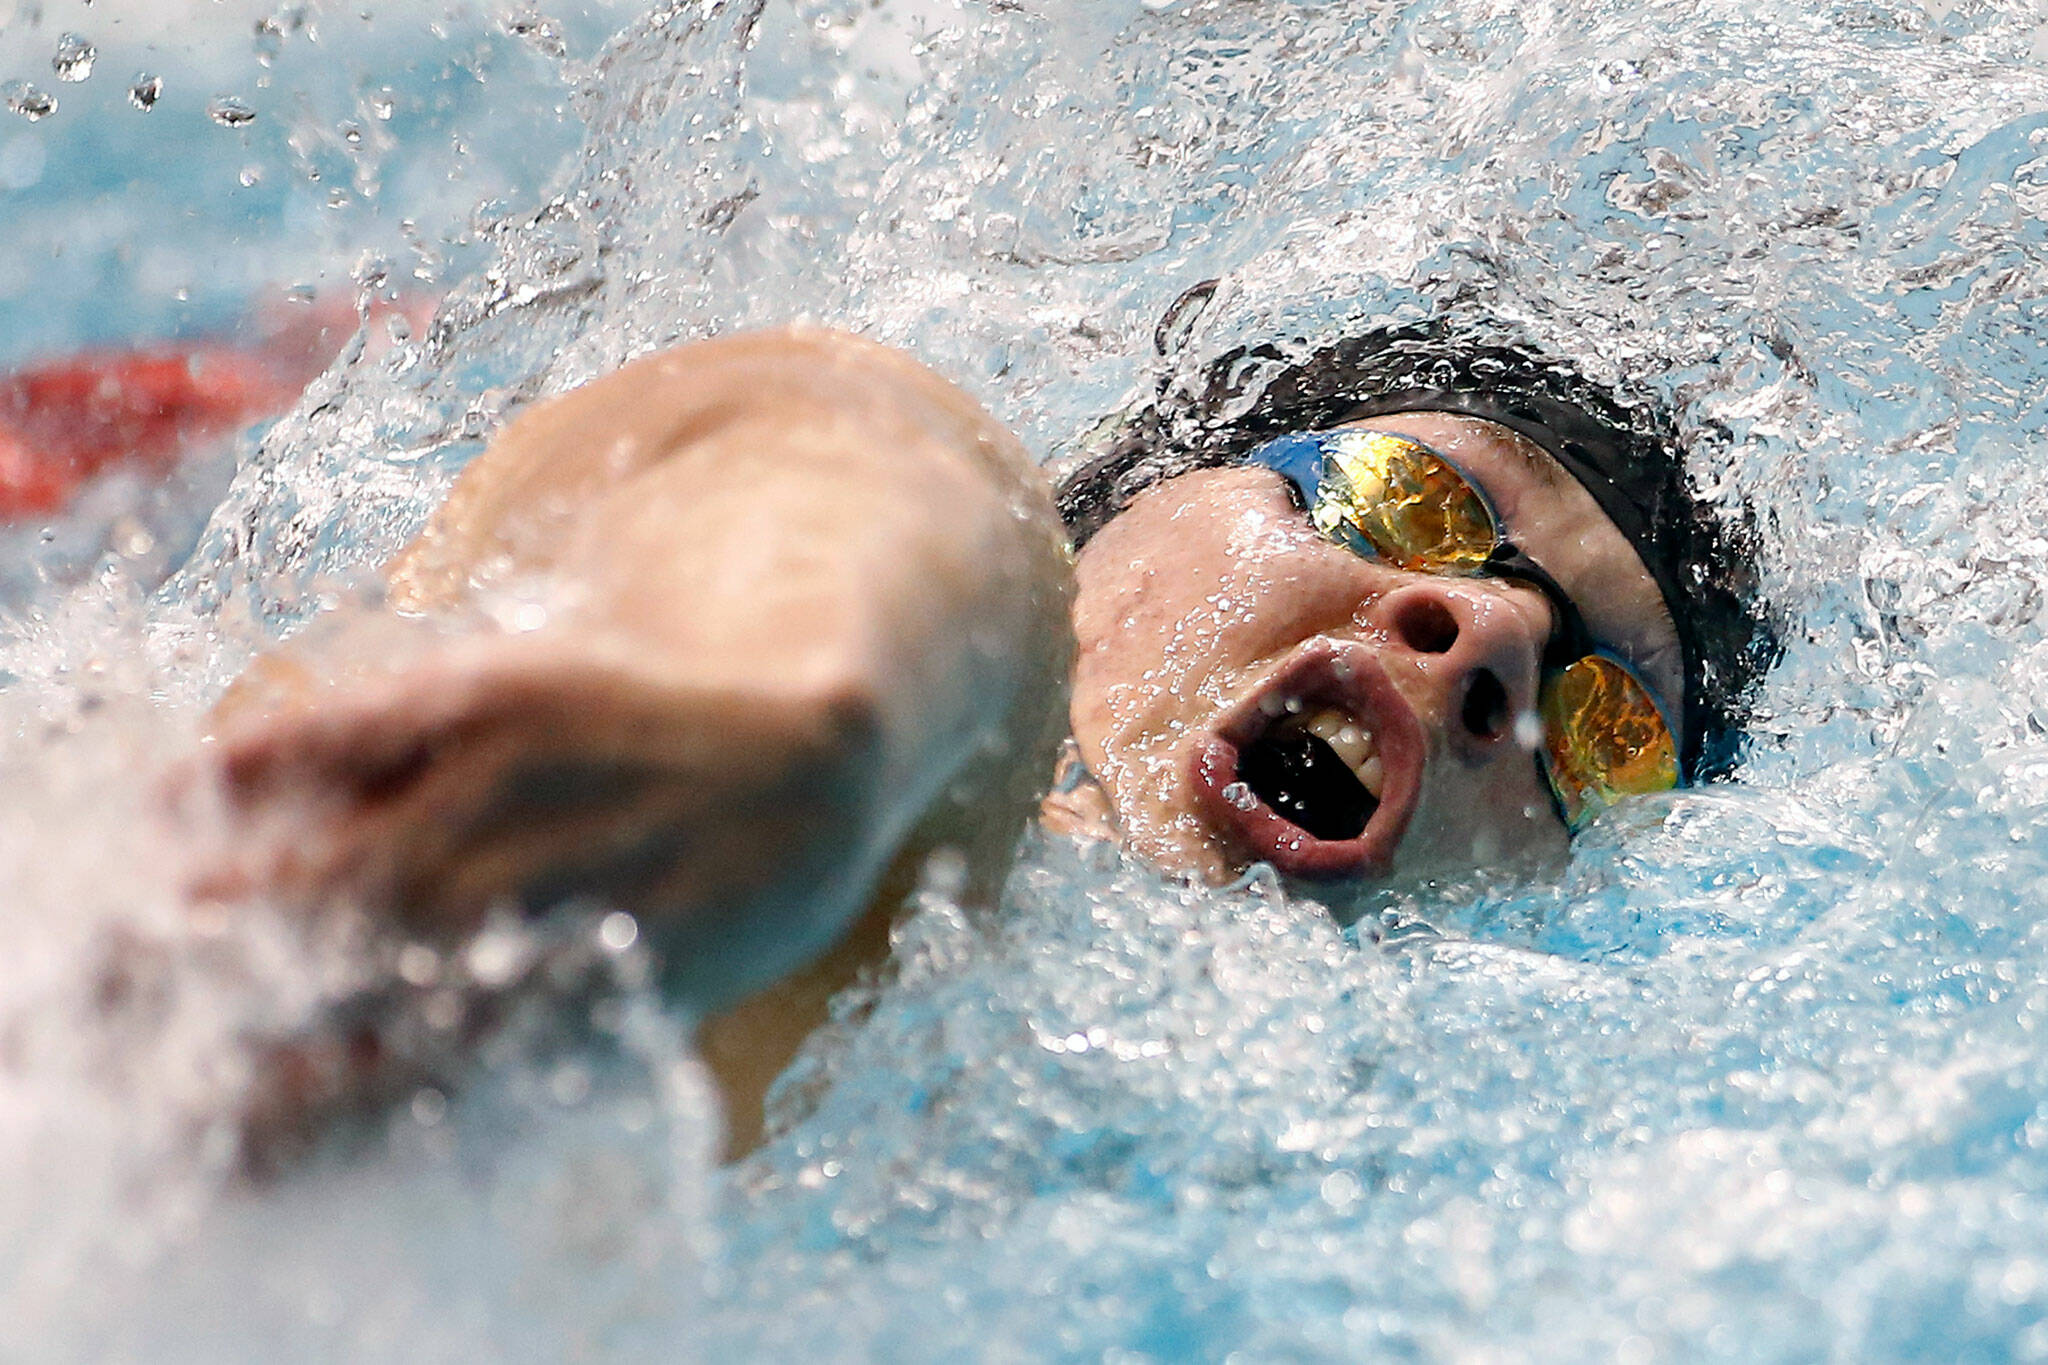 Jensen Elsemore, of Jackson, competes in the 100 yard freestyle during the WIAA 4A Boys Swimming Championship on Saturday at the King County Aquatic Center in Federal Way. (Ryan Berry / The Herald)